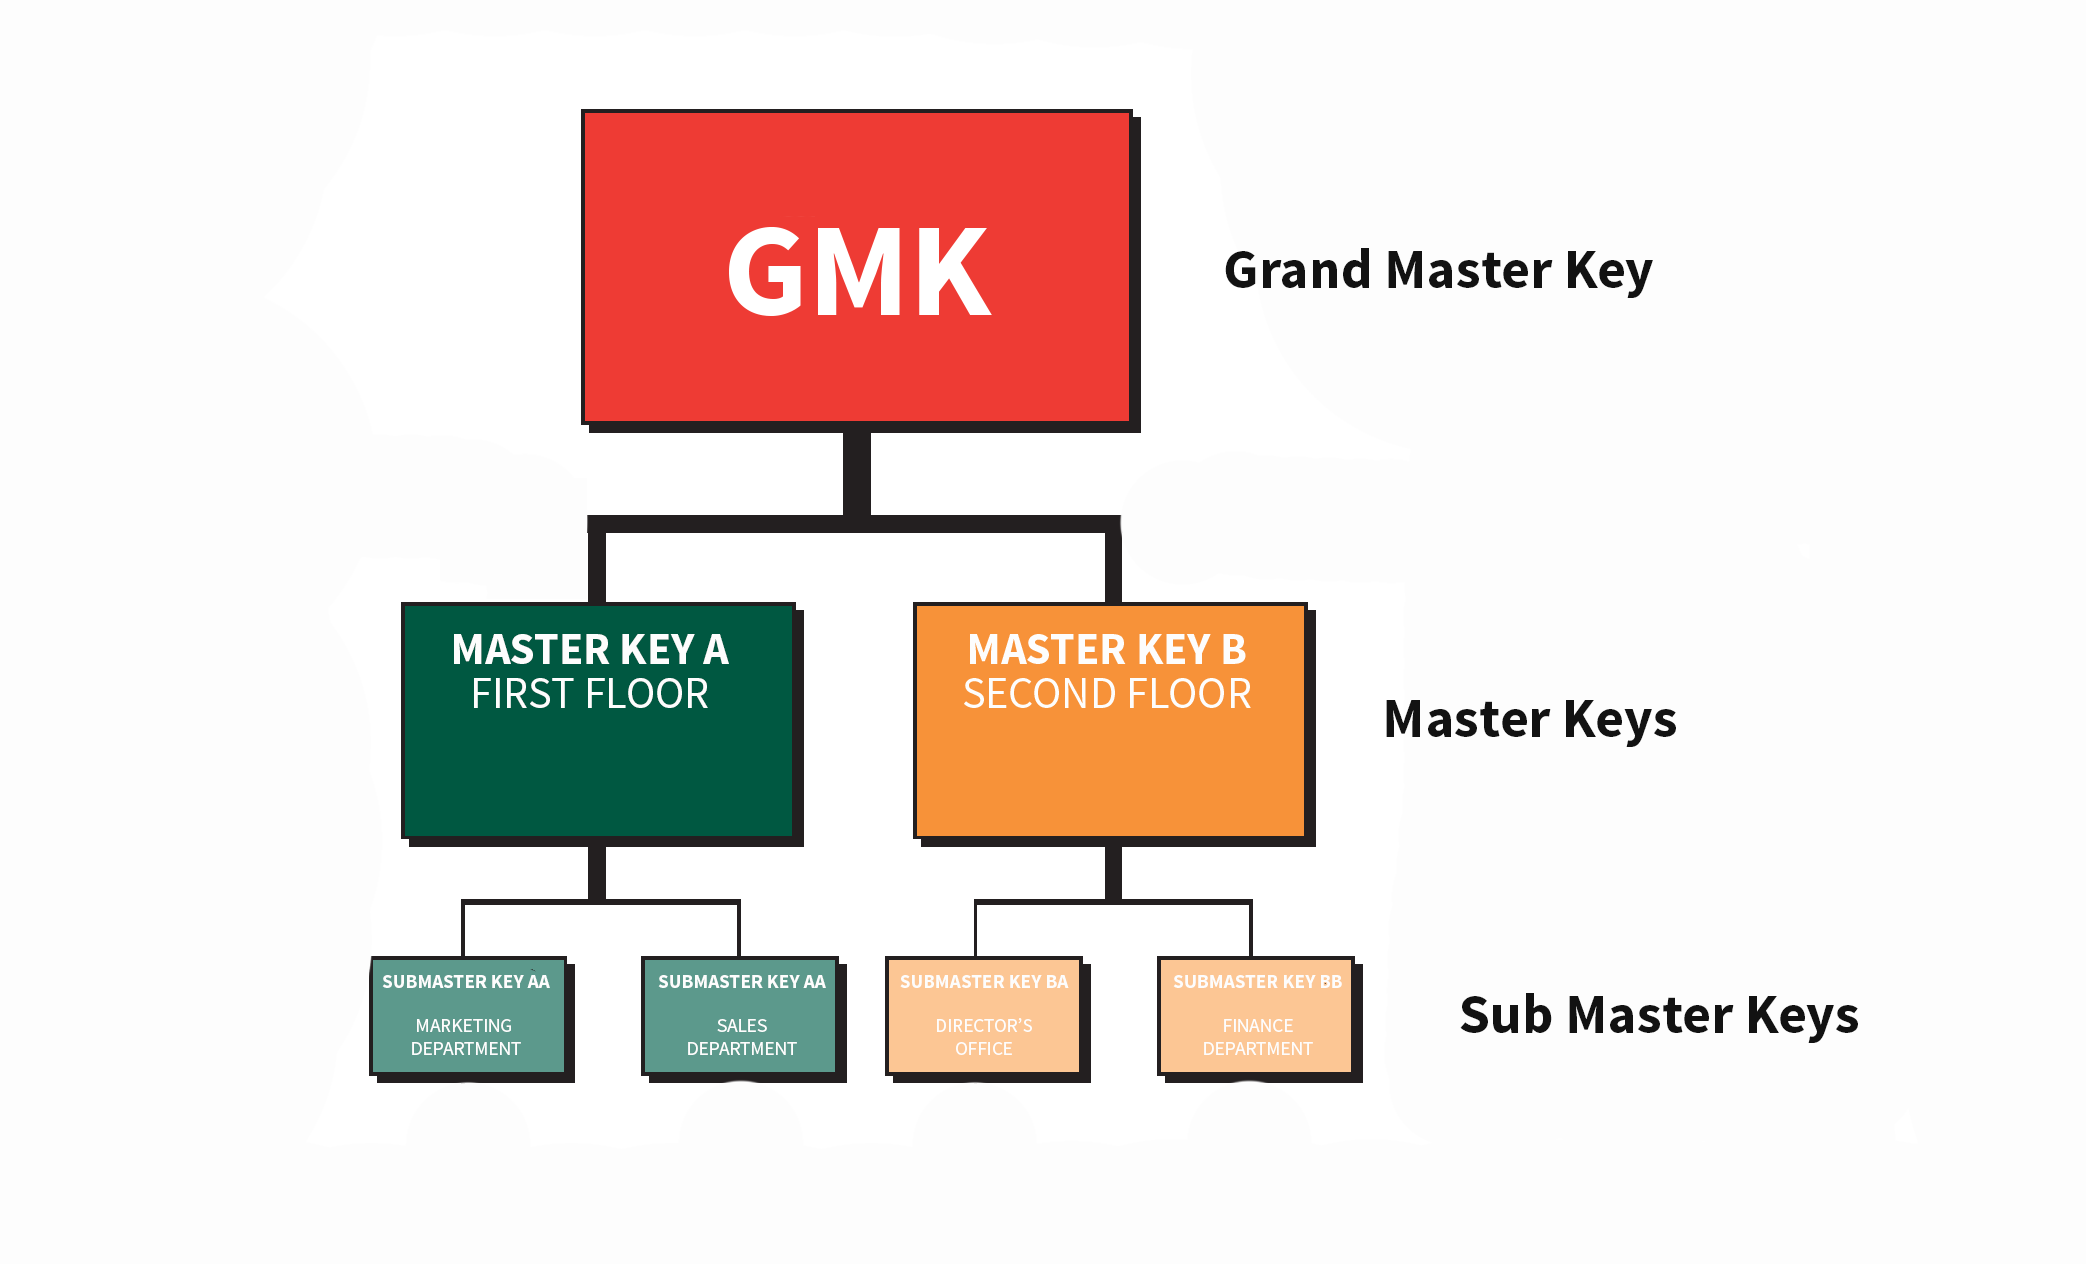 How does a master key work?